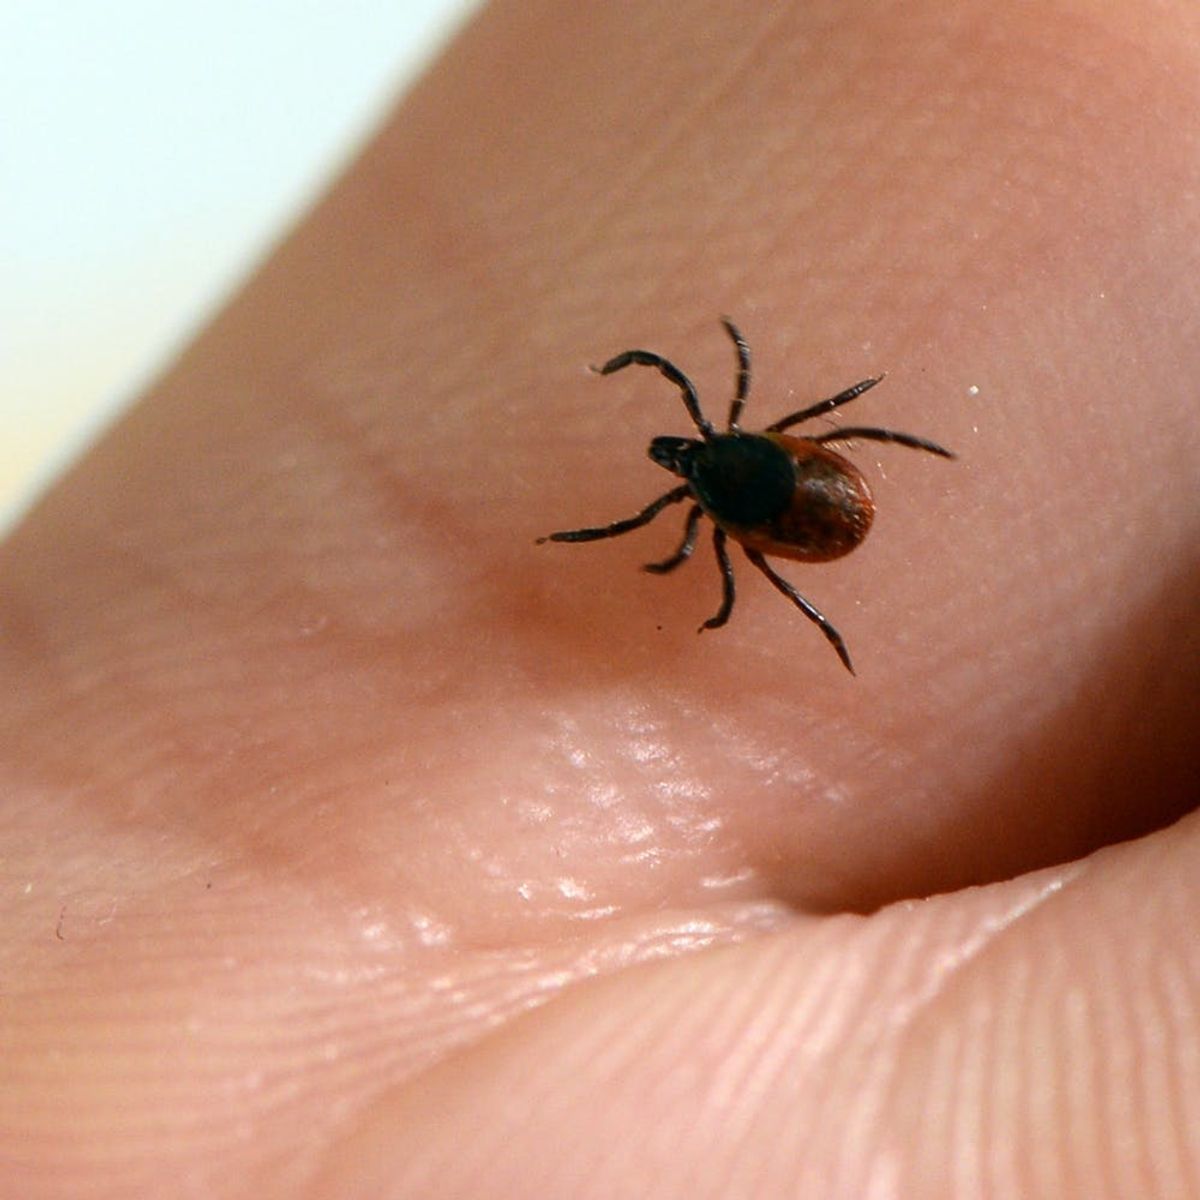 Lyme Disease Is Scary and on the Rise – How to Protect Yourself from Ticks